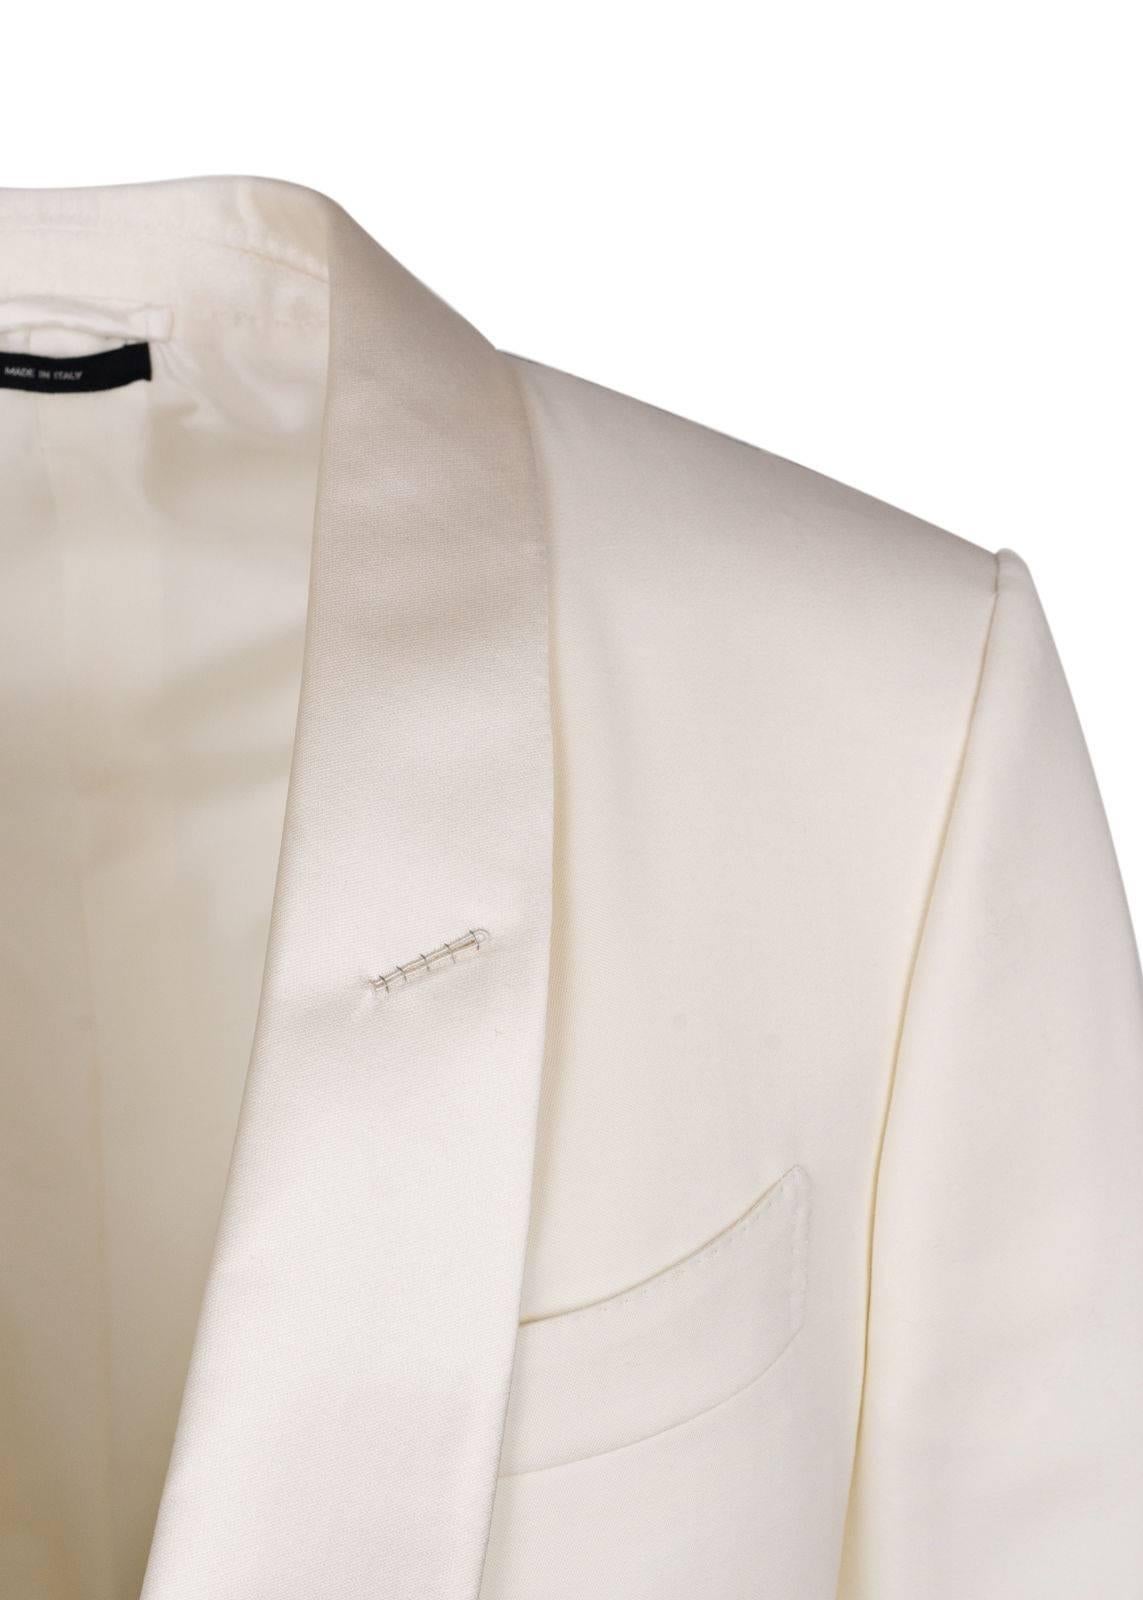 Tom Ford designed this smooth O'Connor Jacket for that special occasion.This wool blend jacket features a satin shawl lapel, classic Y fit, and a rich blend of mohair. You can pair this cocktail jacket with dark streamlined slacks and polished